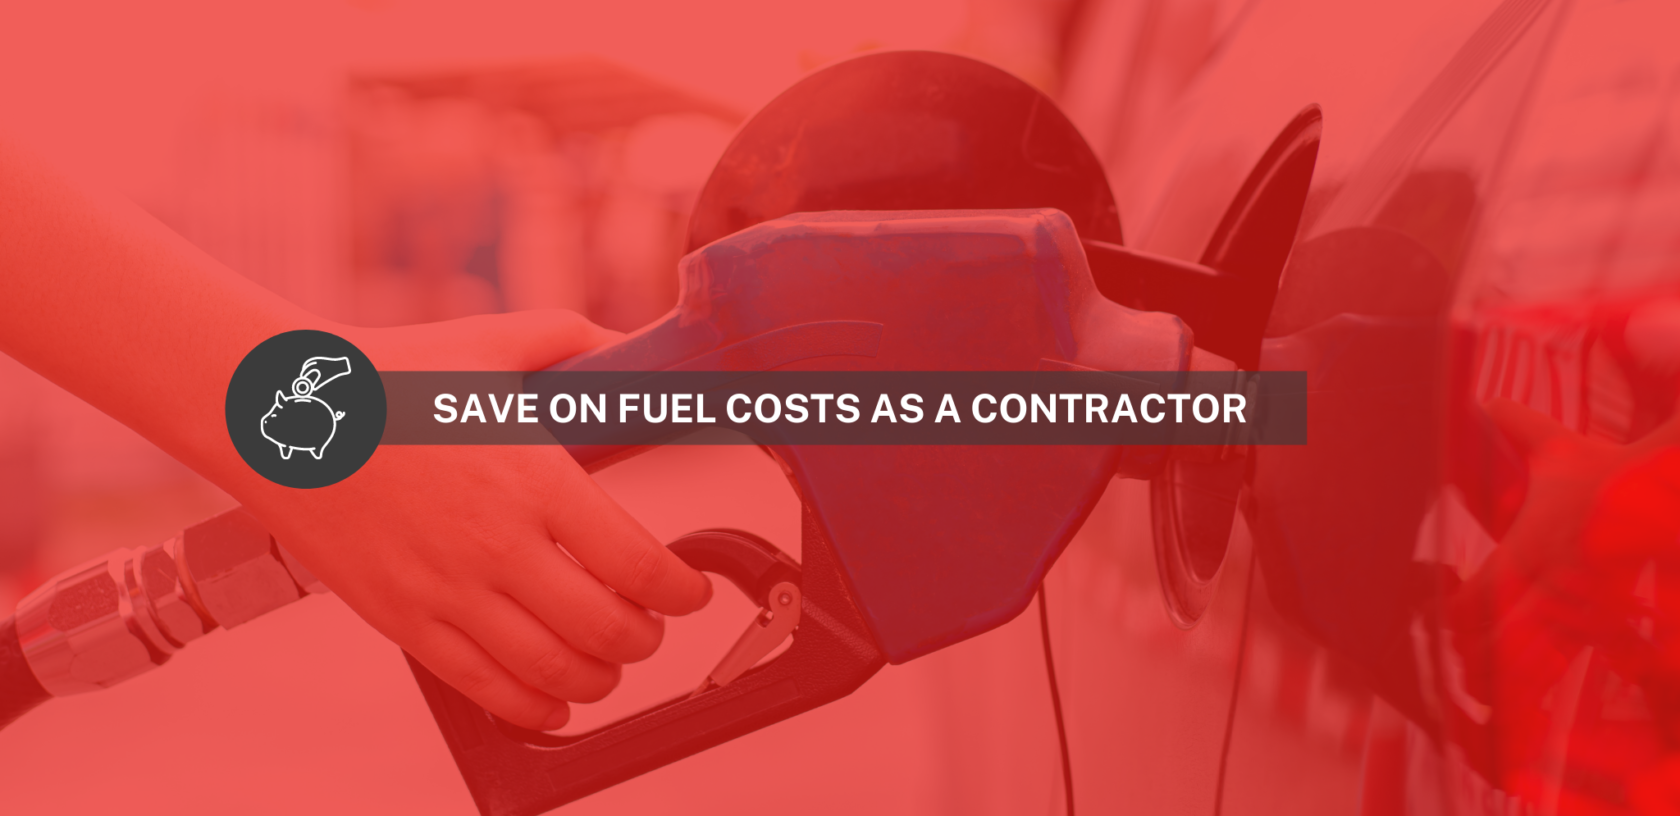 Save on Fuel Costs as a Contractor